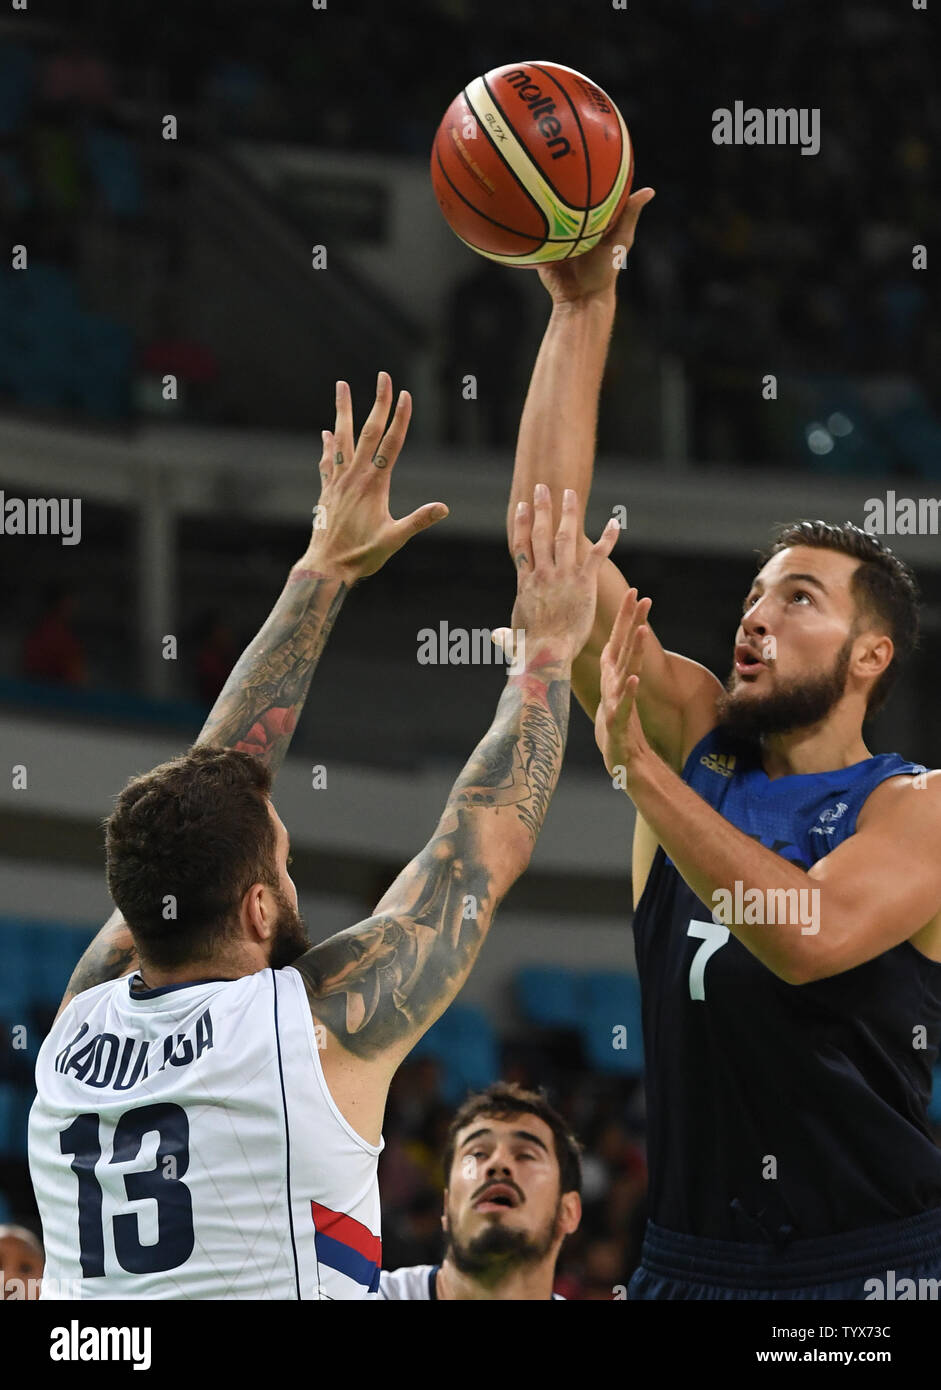 Joffrey Lauvergne (7) of France puts up a shot over Serbia's Miroslav Raduljica (13) in Basketball at the 2016 Rio Summer Olympics in Rio de Janeiro, Brazil, August 10, 2016.  France defeated Serbia 76-75 in a come from behind victory in the last minute.  Photo by Terry Schmitt/UPI Stock Photo